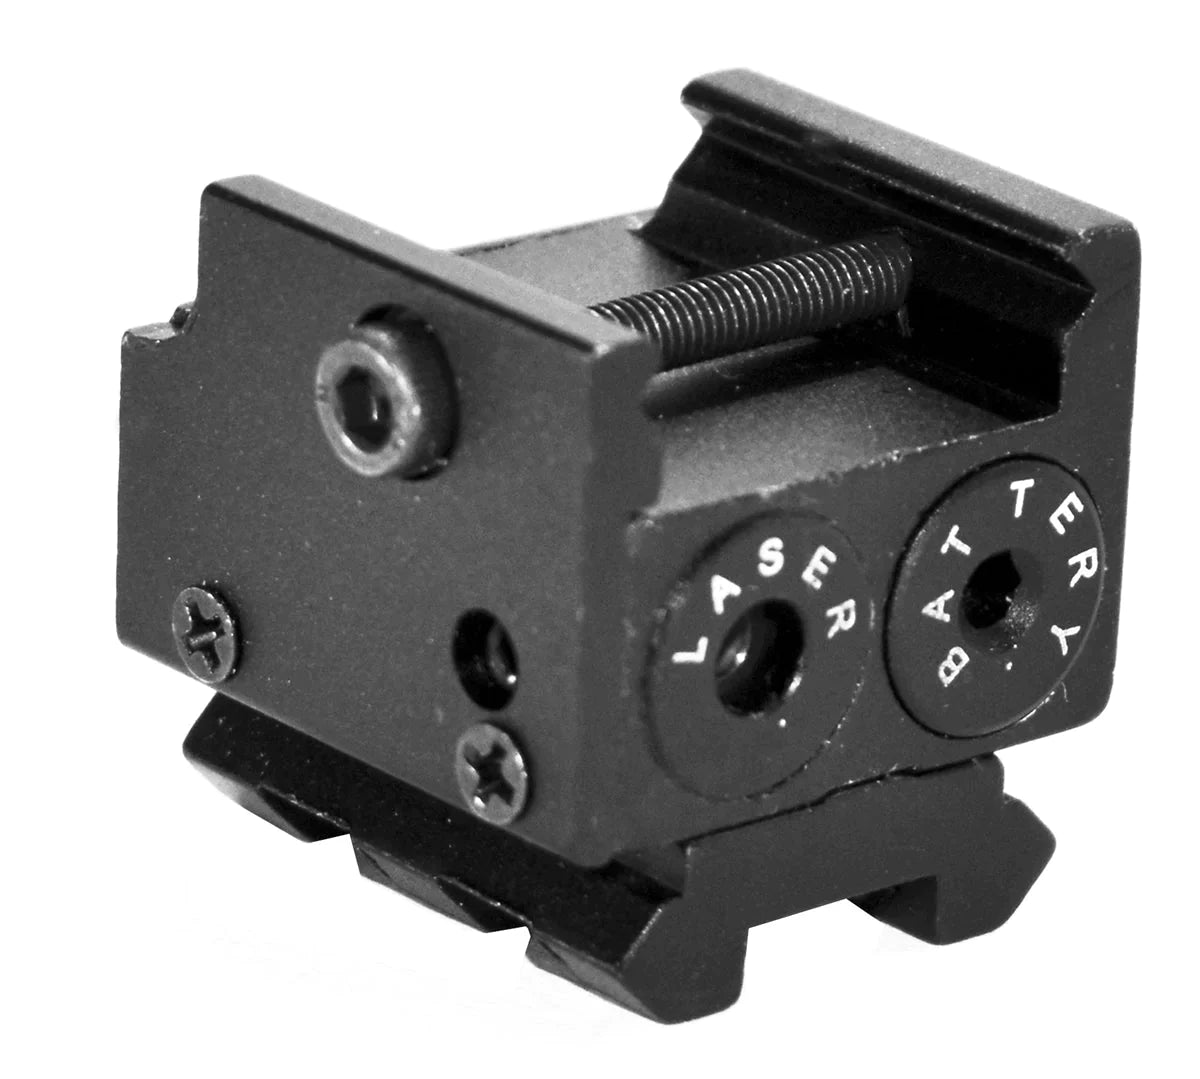 Trinity picatinny Mounted red dot laser Sight For Glock 19 Gen5 accessories home defense. - TRINITY SUPPLY INC